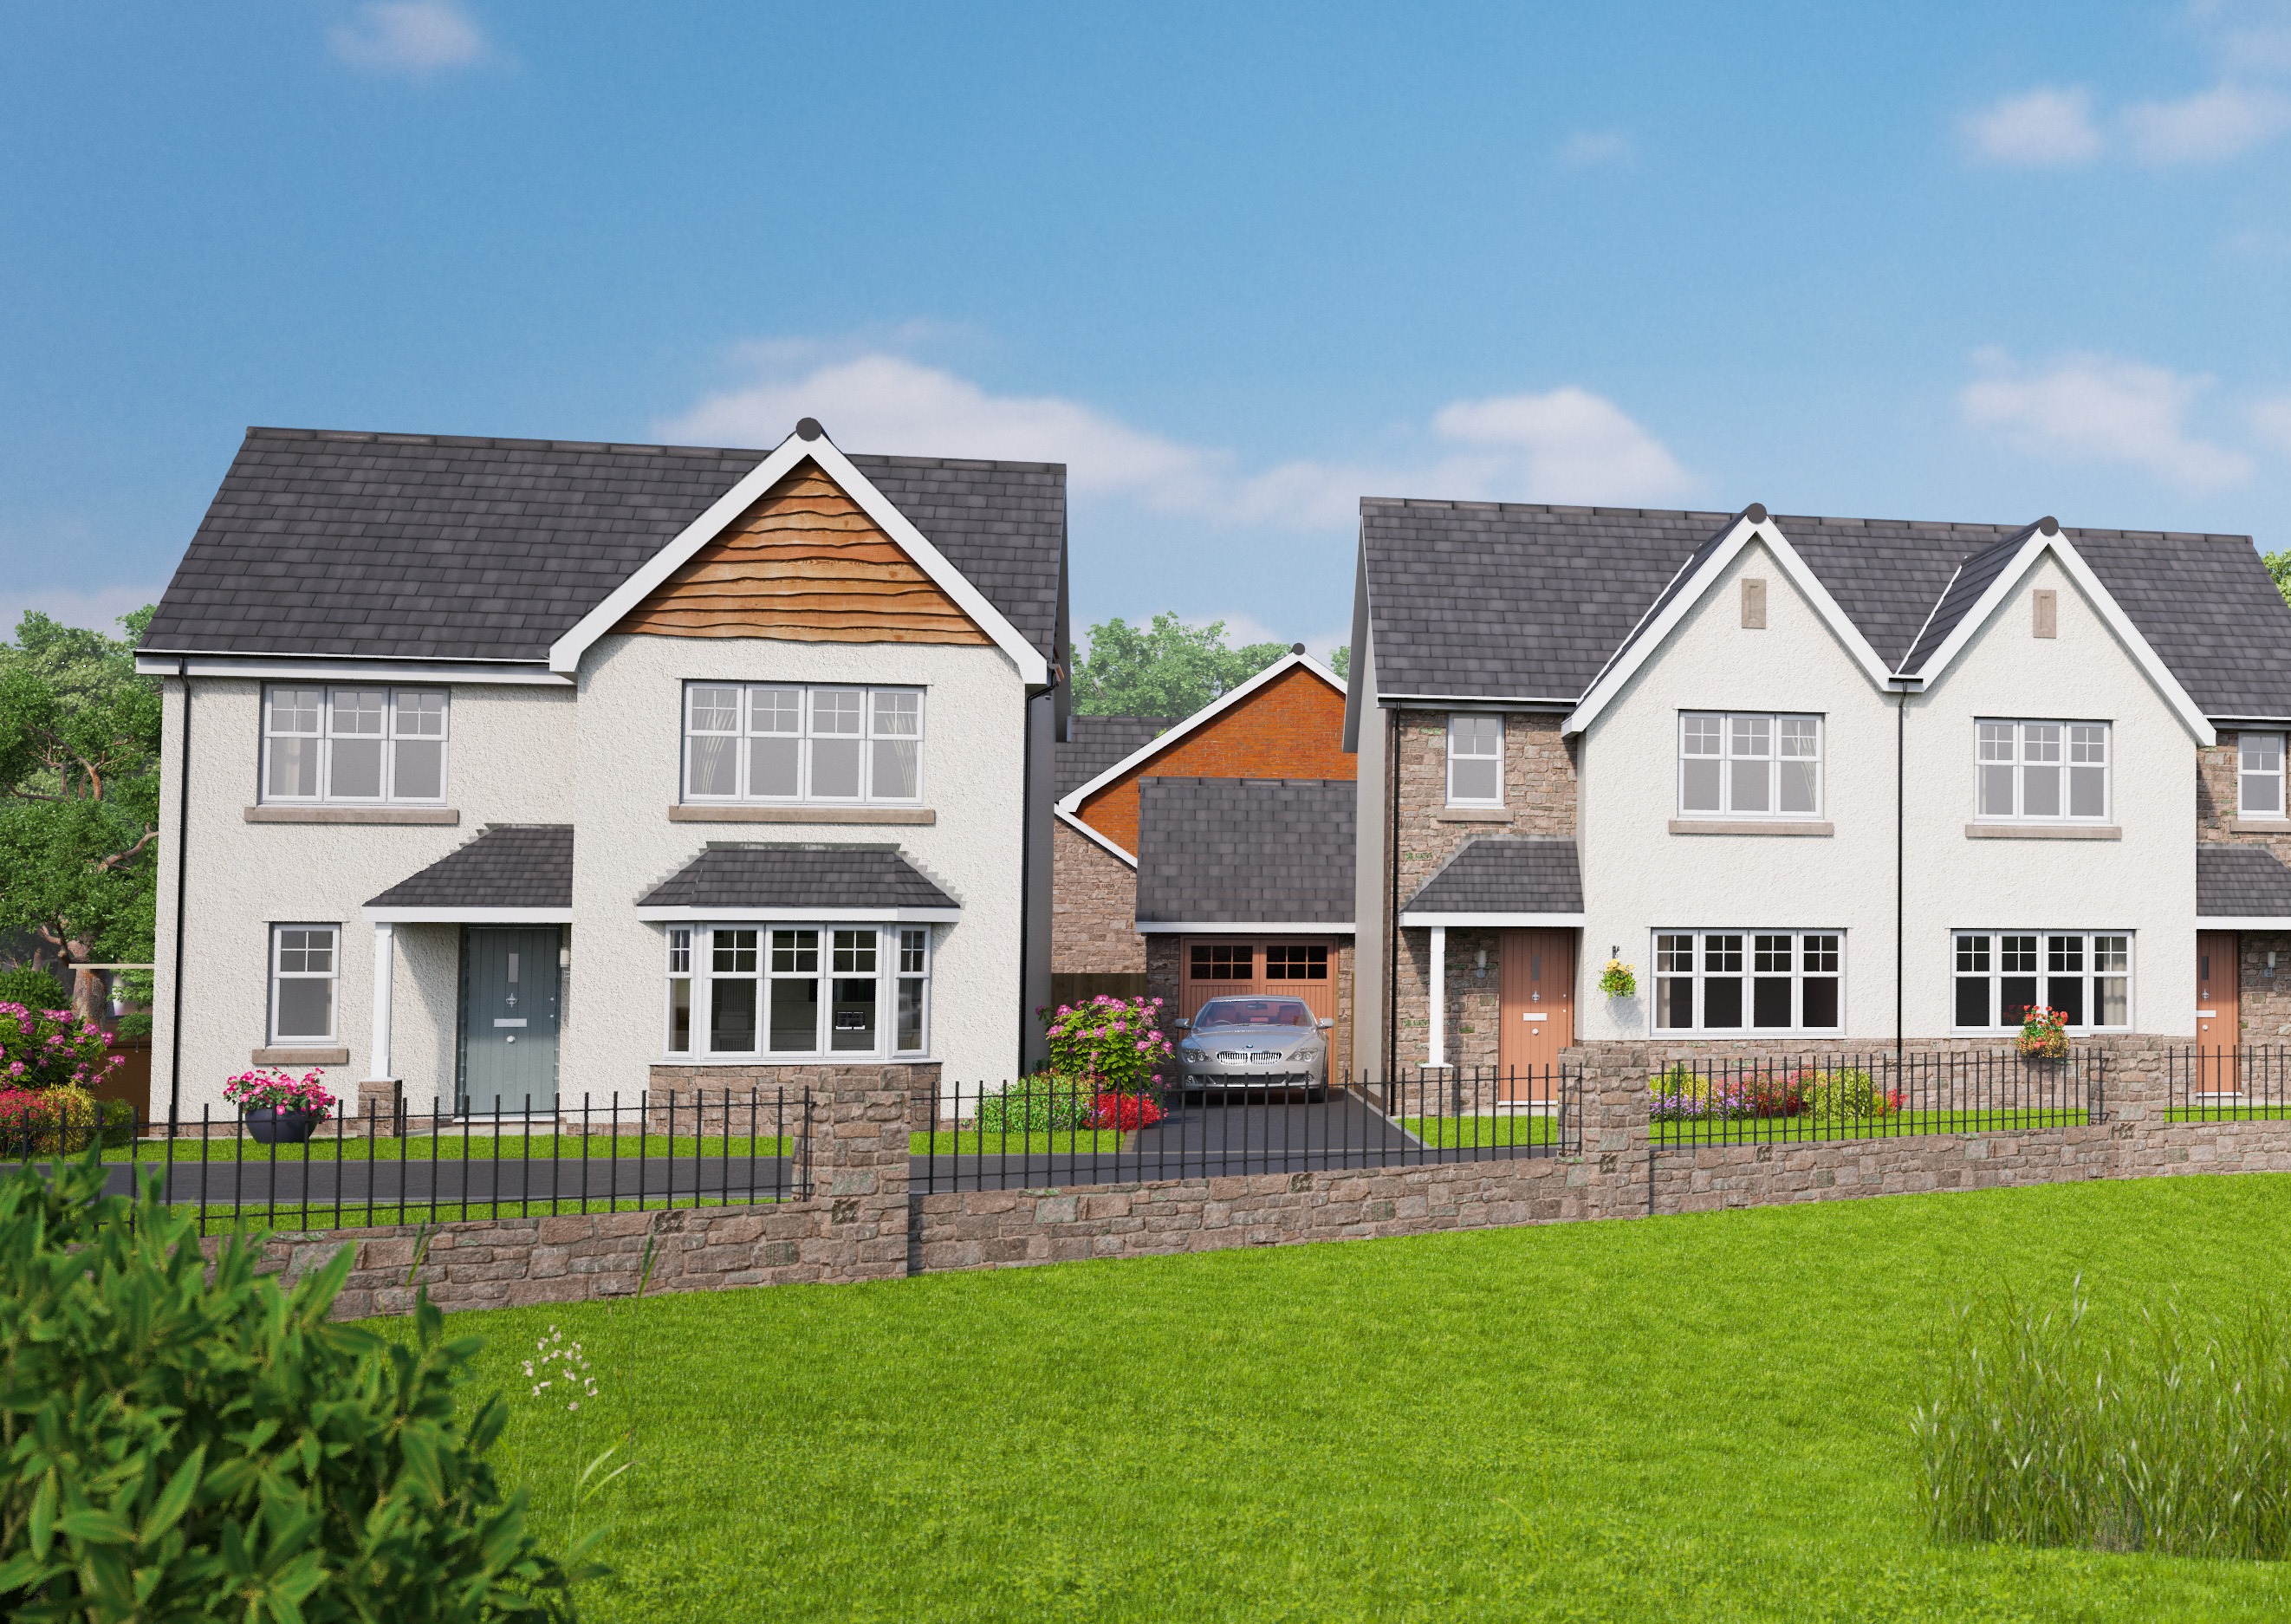 Construction begins at Macbryde Homes development in Abergale